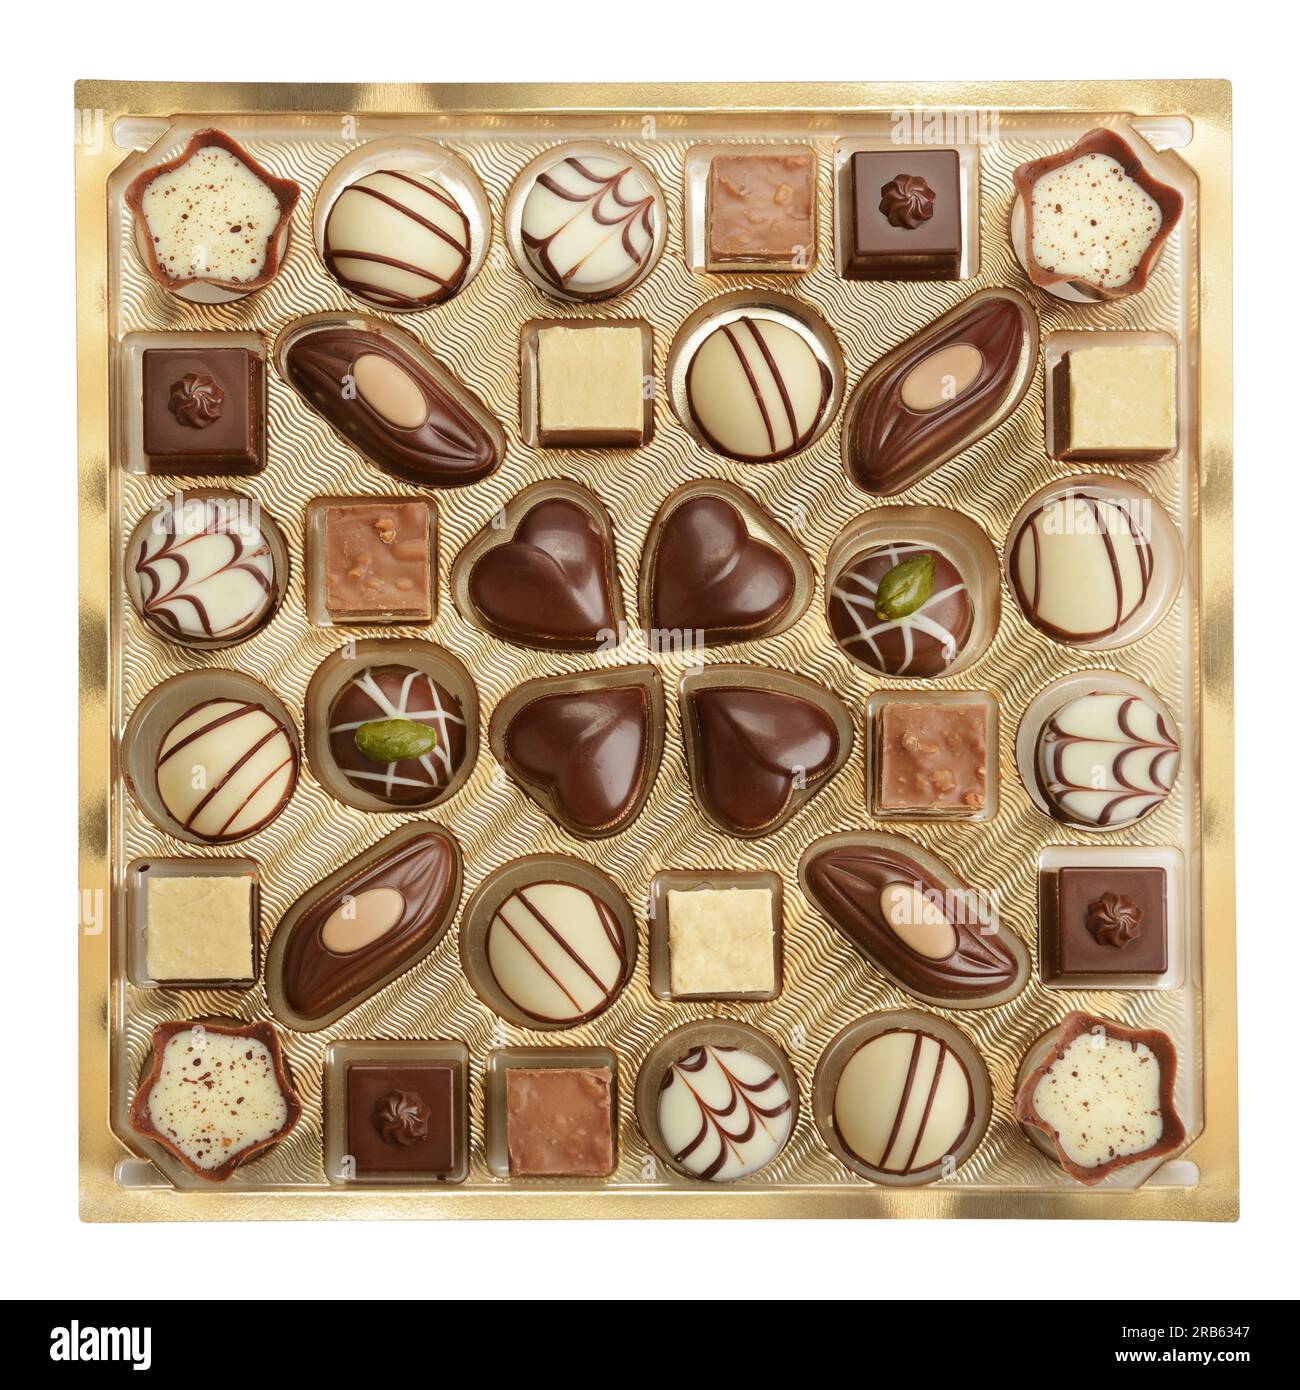 Mon Cheri chocolate box with one bonbons remained Stock Photo - Alamy